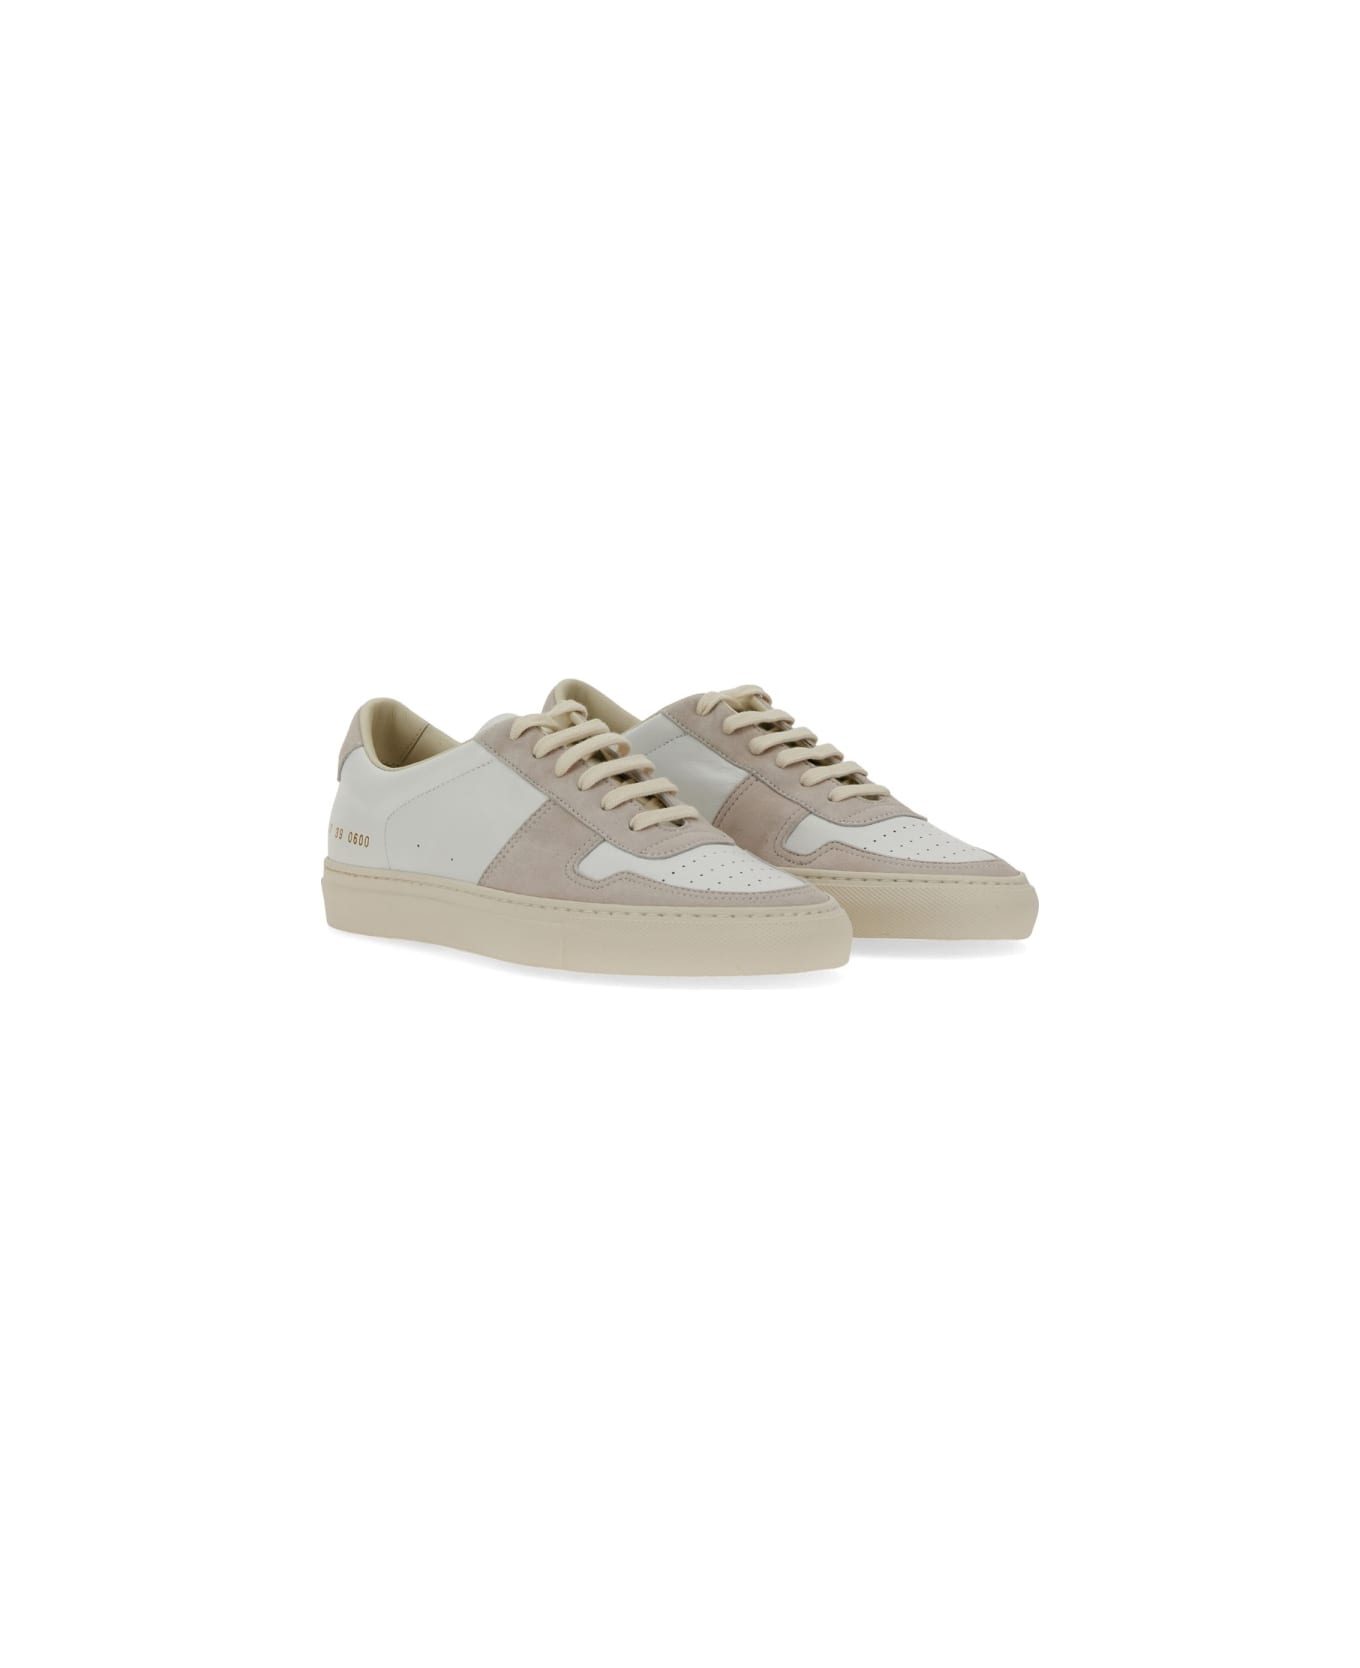 Common Projects "bball" Sneaker - NUDE スニーカー